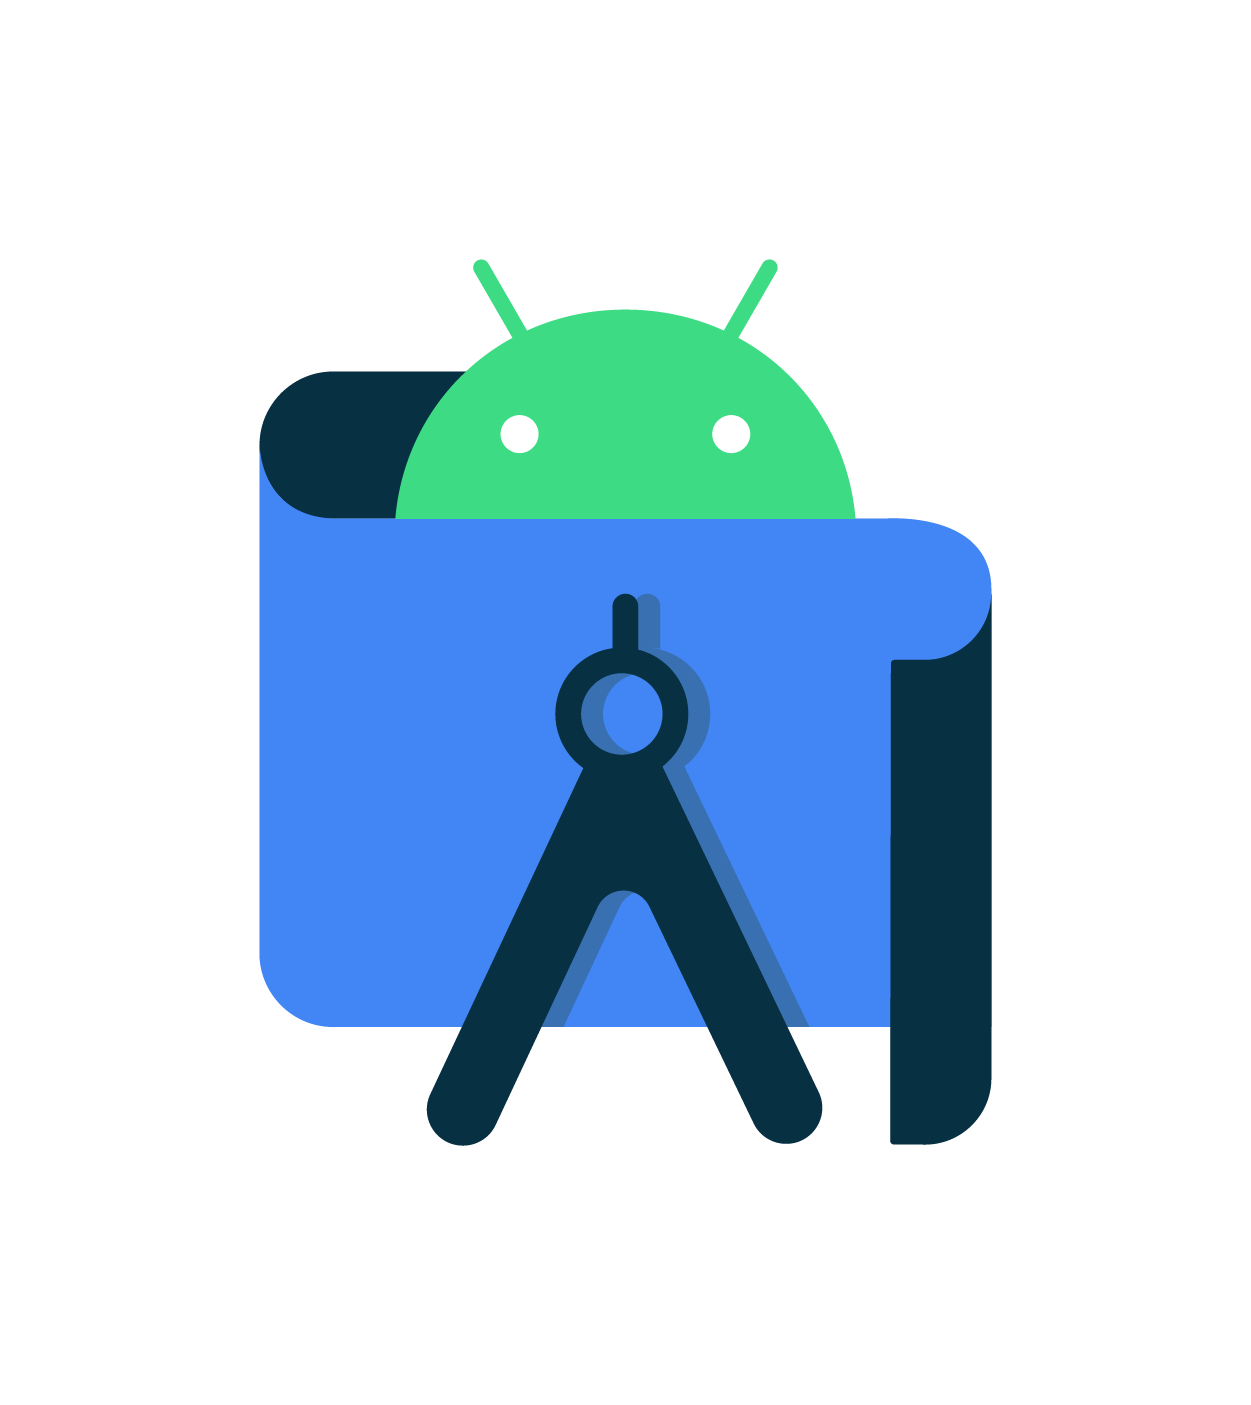 baguette icon for android studio